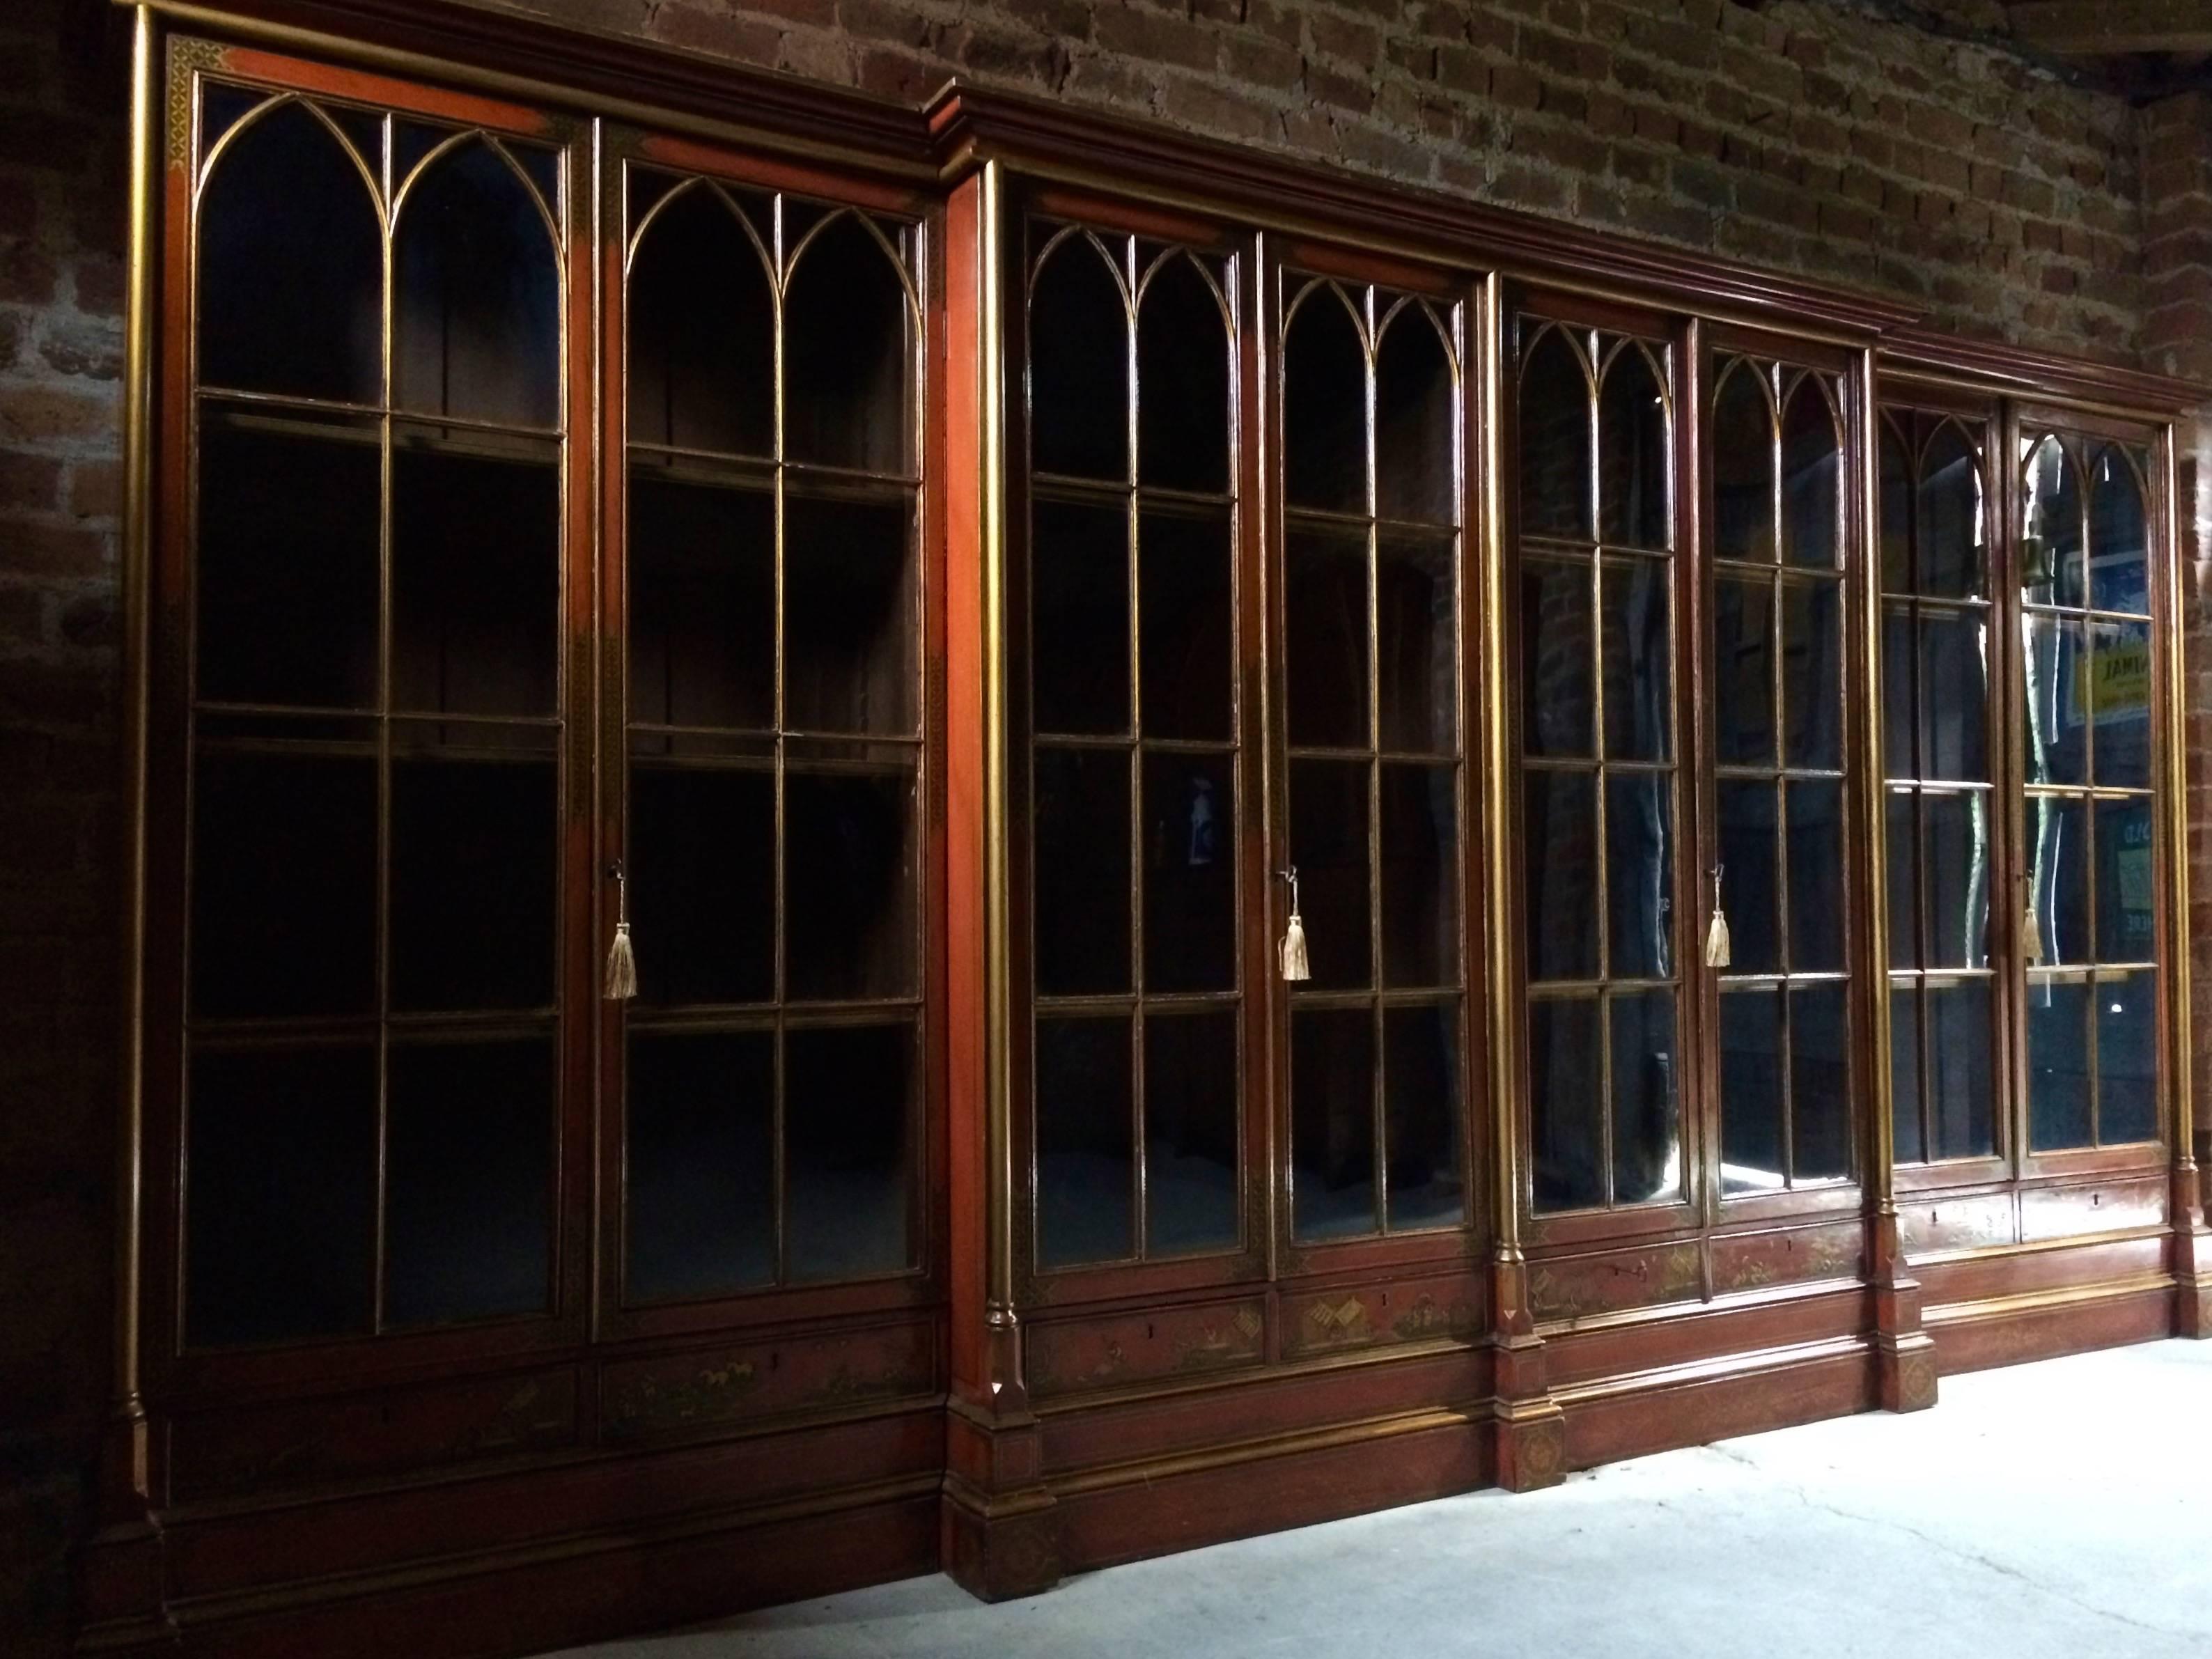 Magnificent large and imposing George III Japanned breakfront library bookcase dating to circa 1820, the six glazed doors with Moorish style astragal glazed arches above eight small drawers below each with individual scenes of villages, rivers and